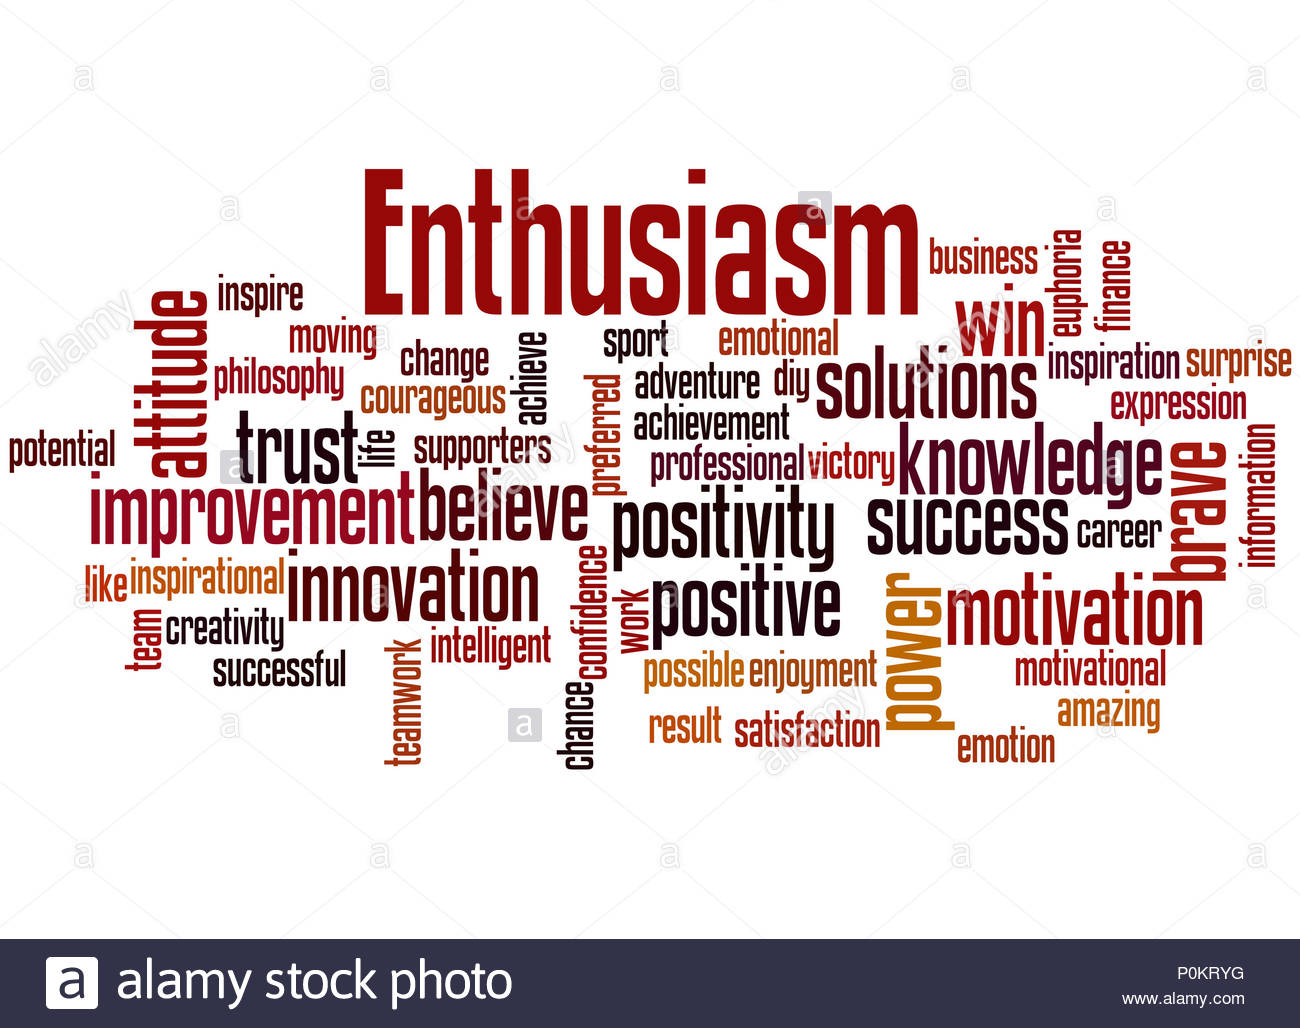 Enthusiasm Word Cloud Concept On White Background Stock Photo